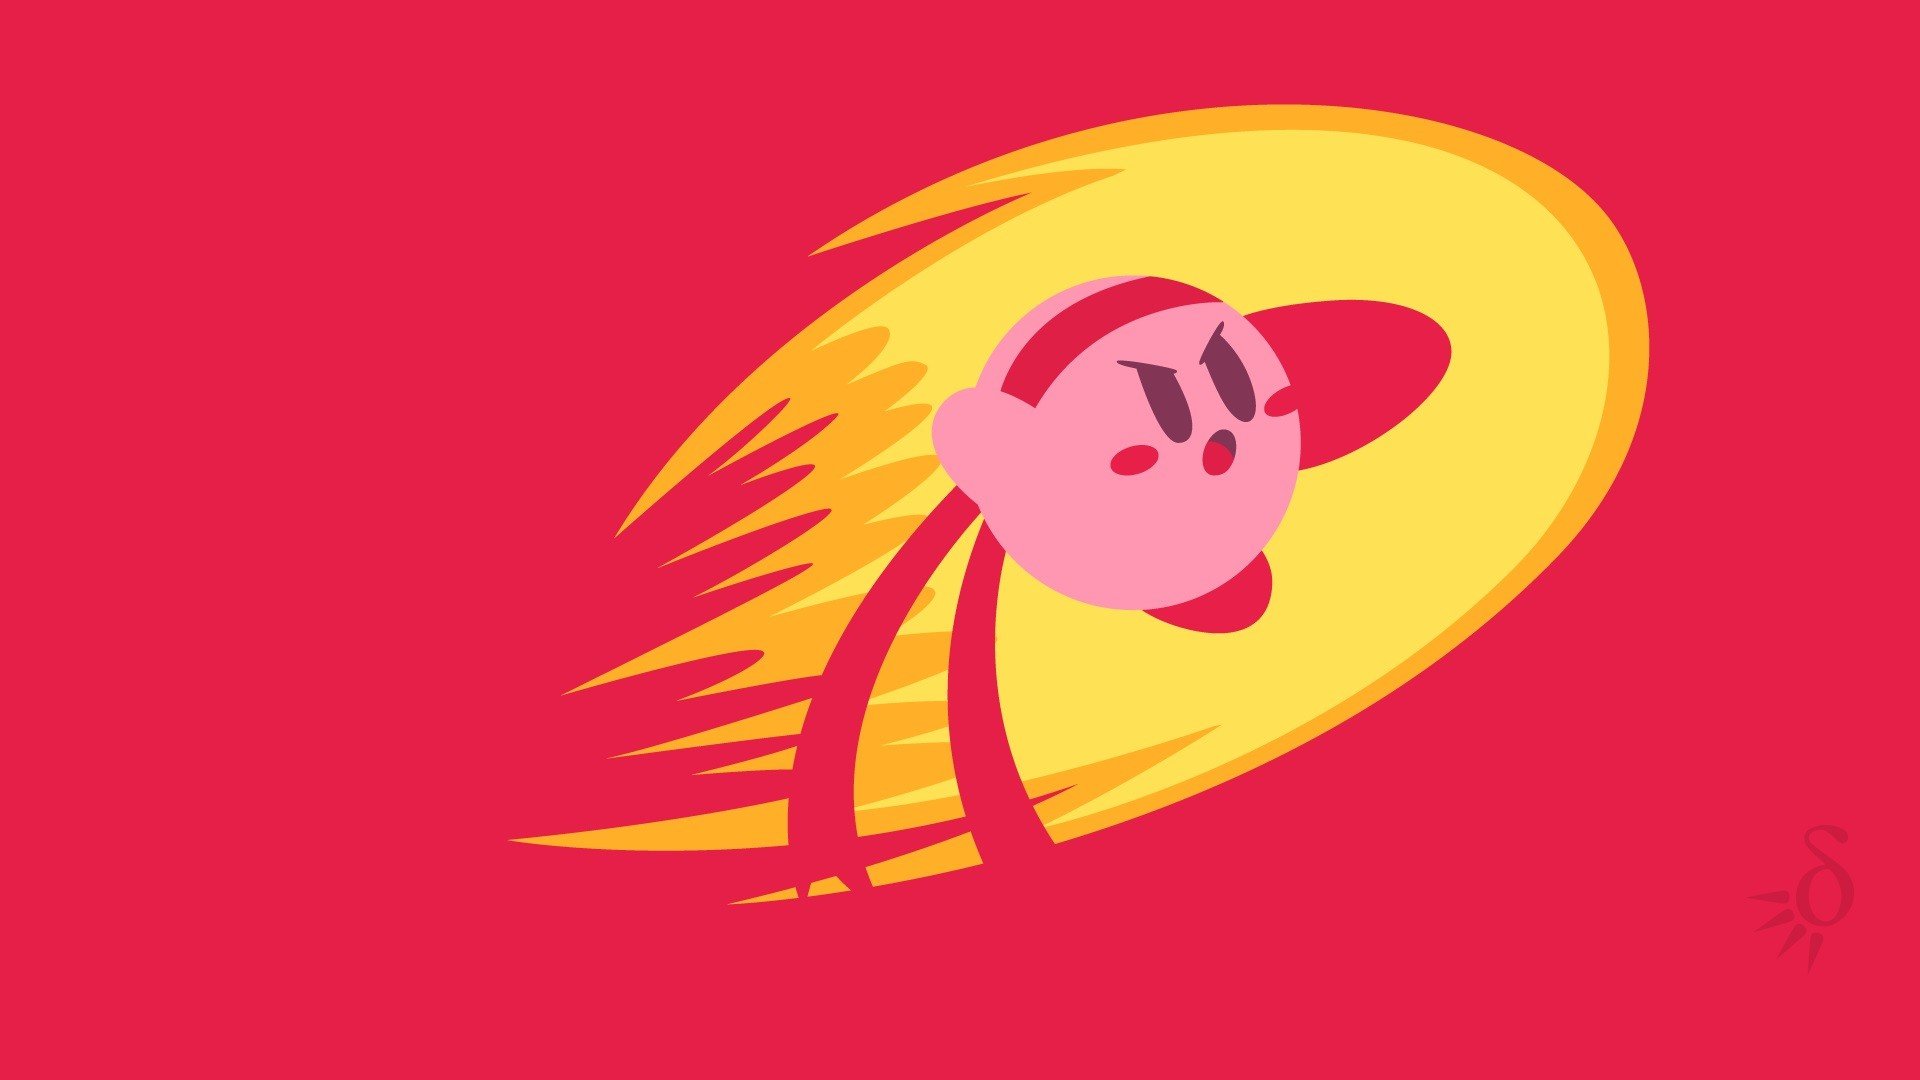 kirby, Video, Games, Red, Simple, Fighter Wallpaper